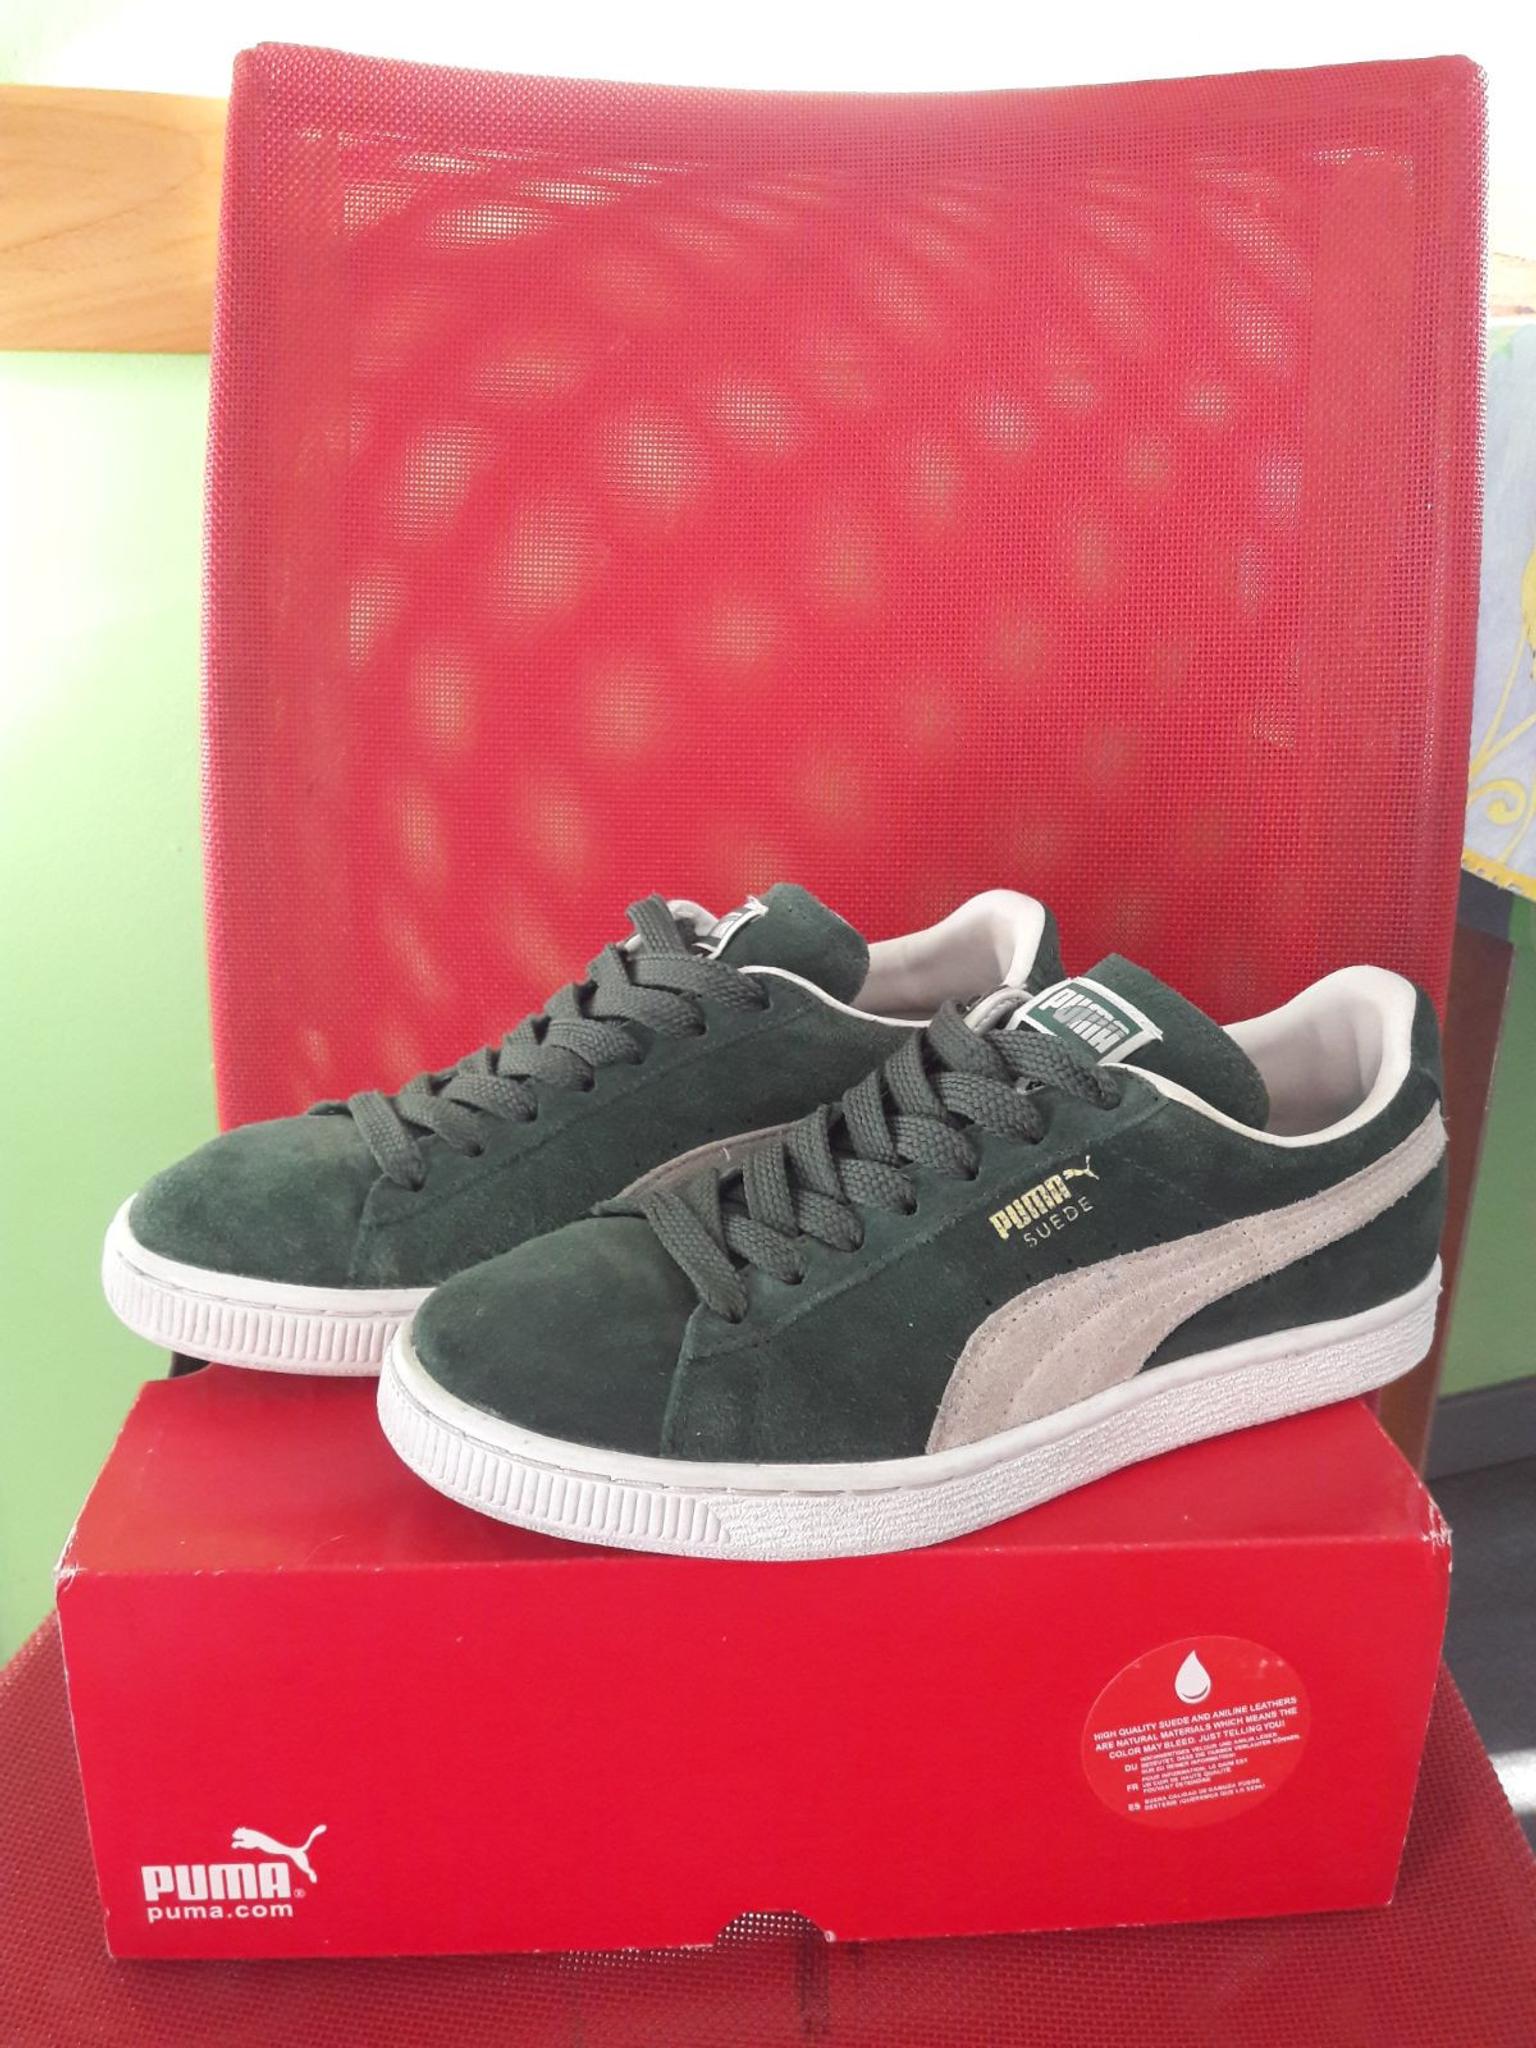 Puma Suede n. 37 1/2 Verde scuro in 10134 Torino for €40.00 for sale |  Shpock